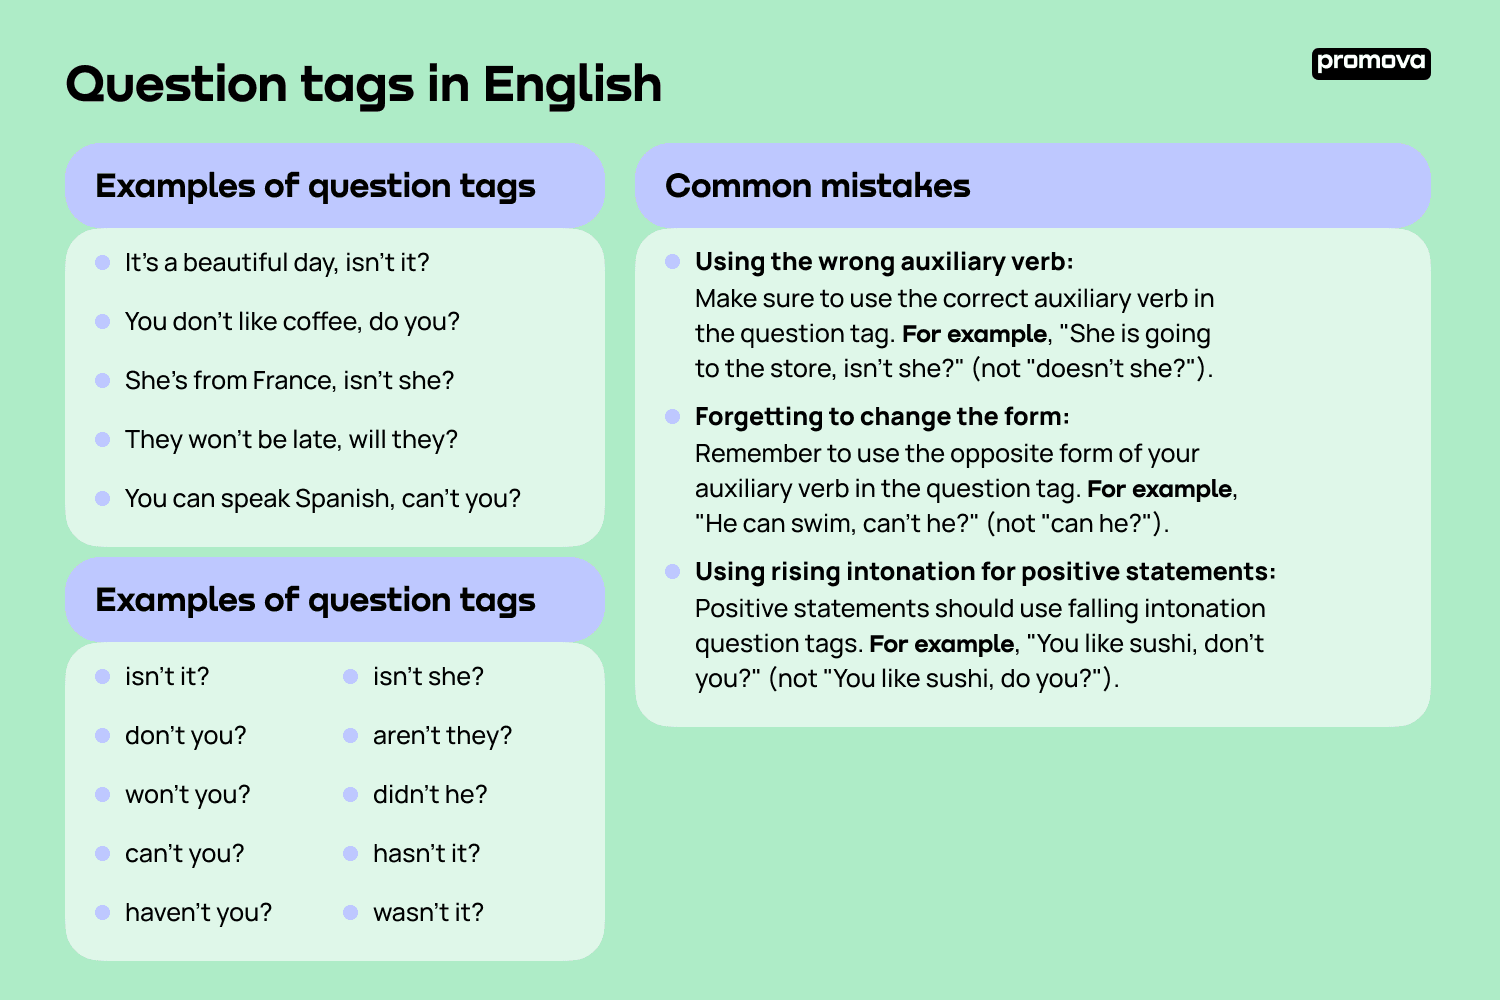 Examples of question tags